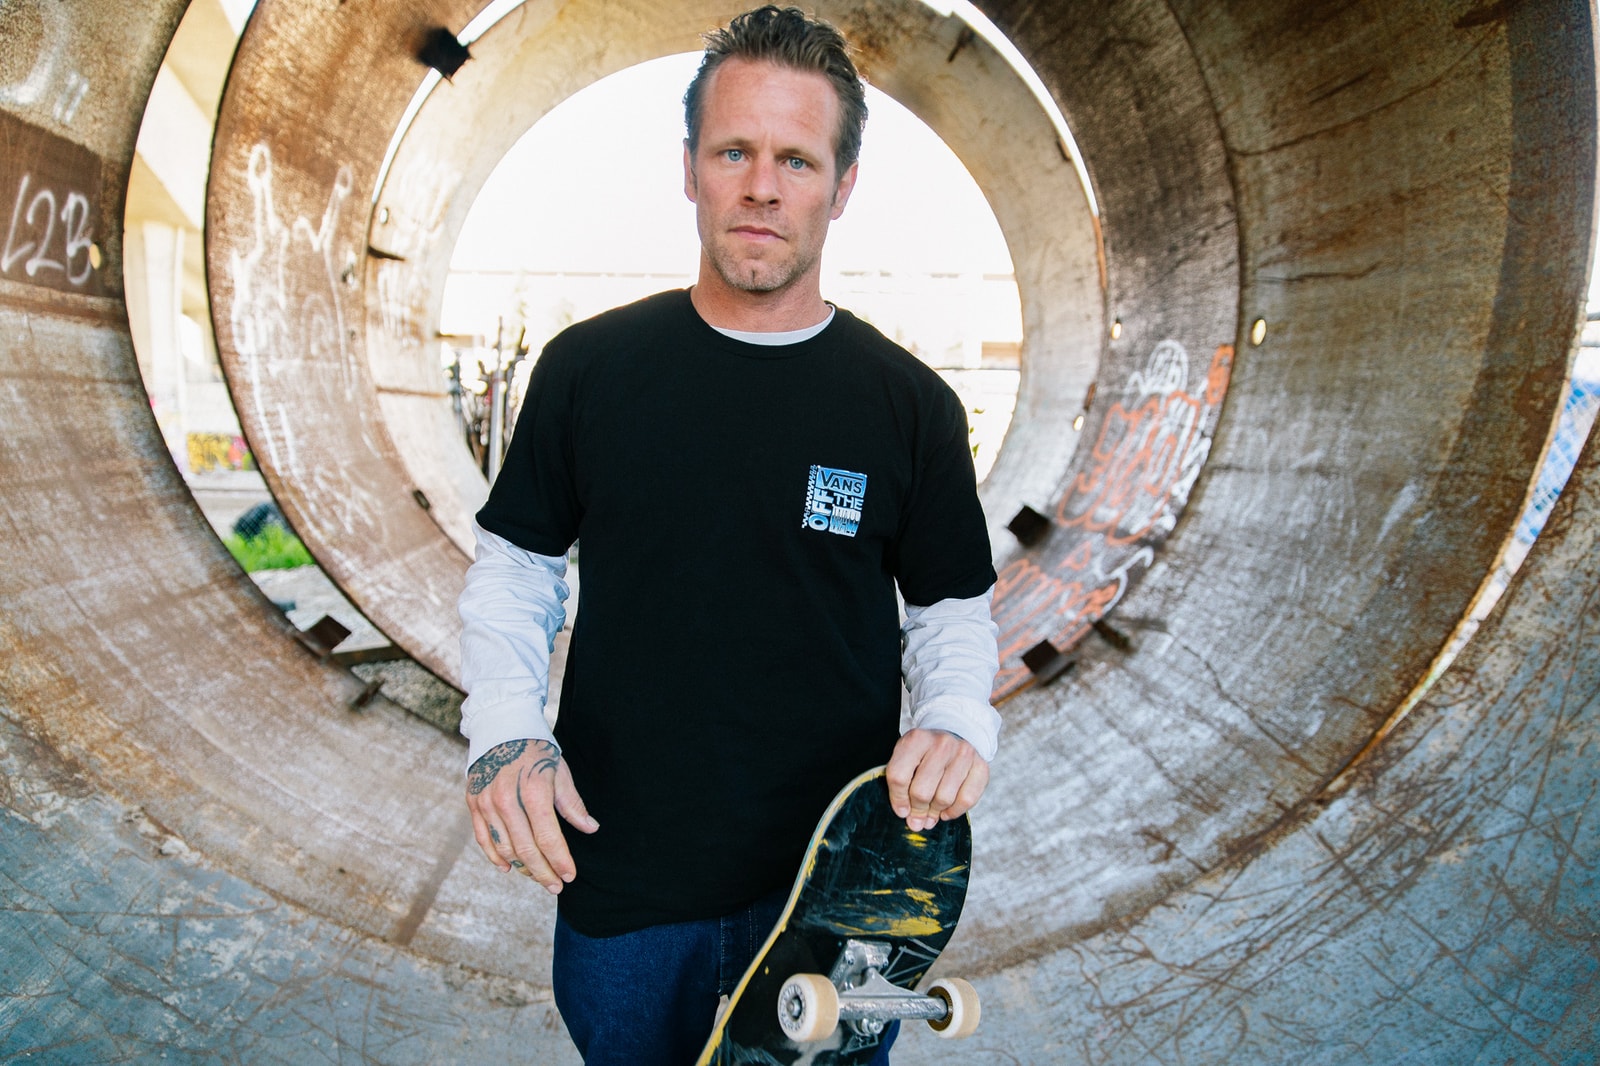 VANS INTRODUCES ANTHONY ENGELEN'S NEW SHOE & APPAREL COLLECTION | The Berrics